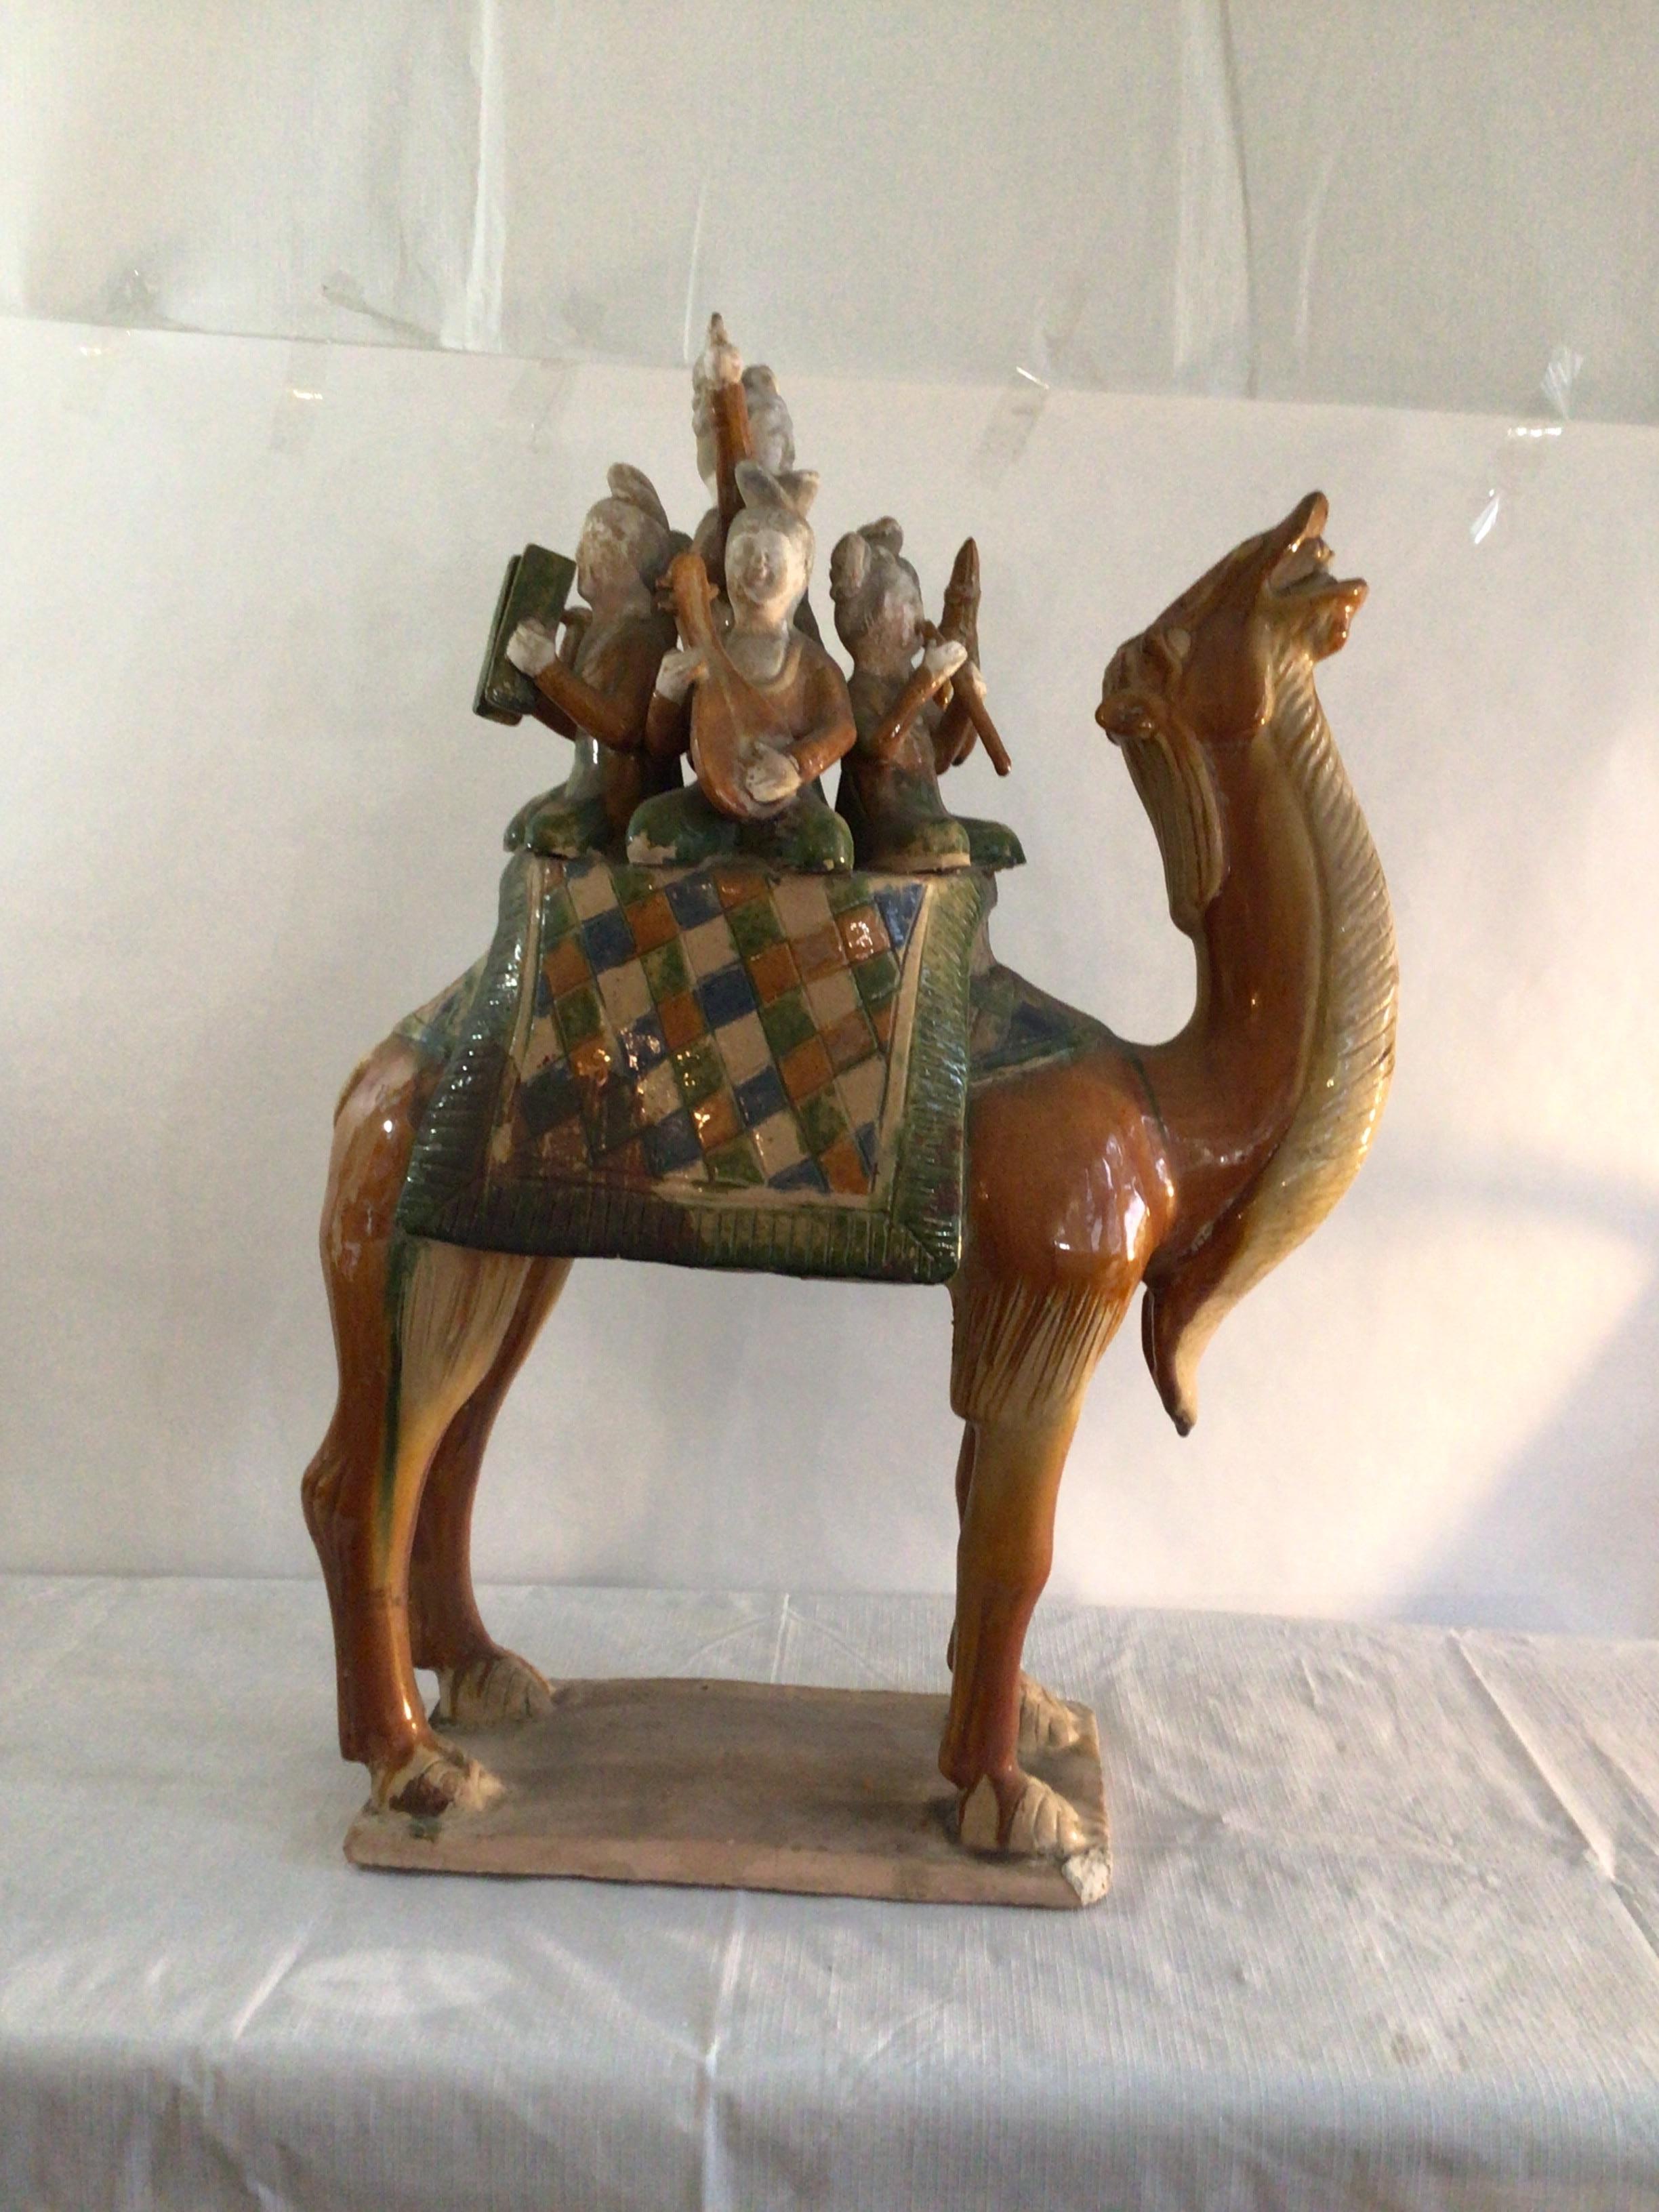 1960s Glazed Sculpture Of A Camel Carrying Musicians
Chinese style terra cotta tomb figure carrying a band of musicians
The figurine utilizes: brown, green, blue and off-white pigments
One of the front corners - piece missing (as shown in picture)